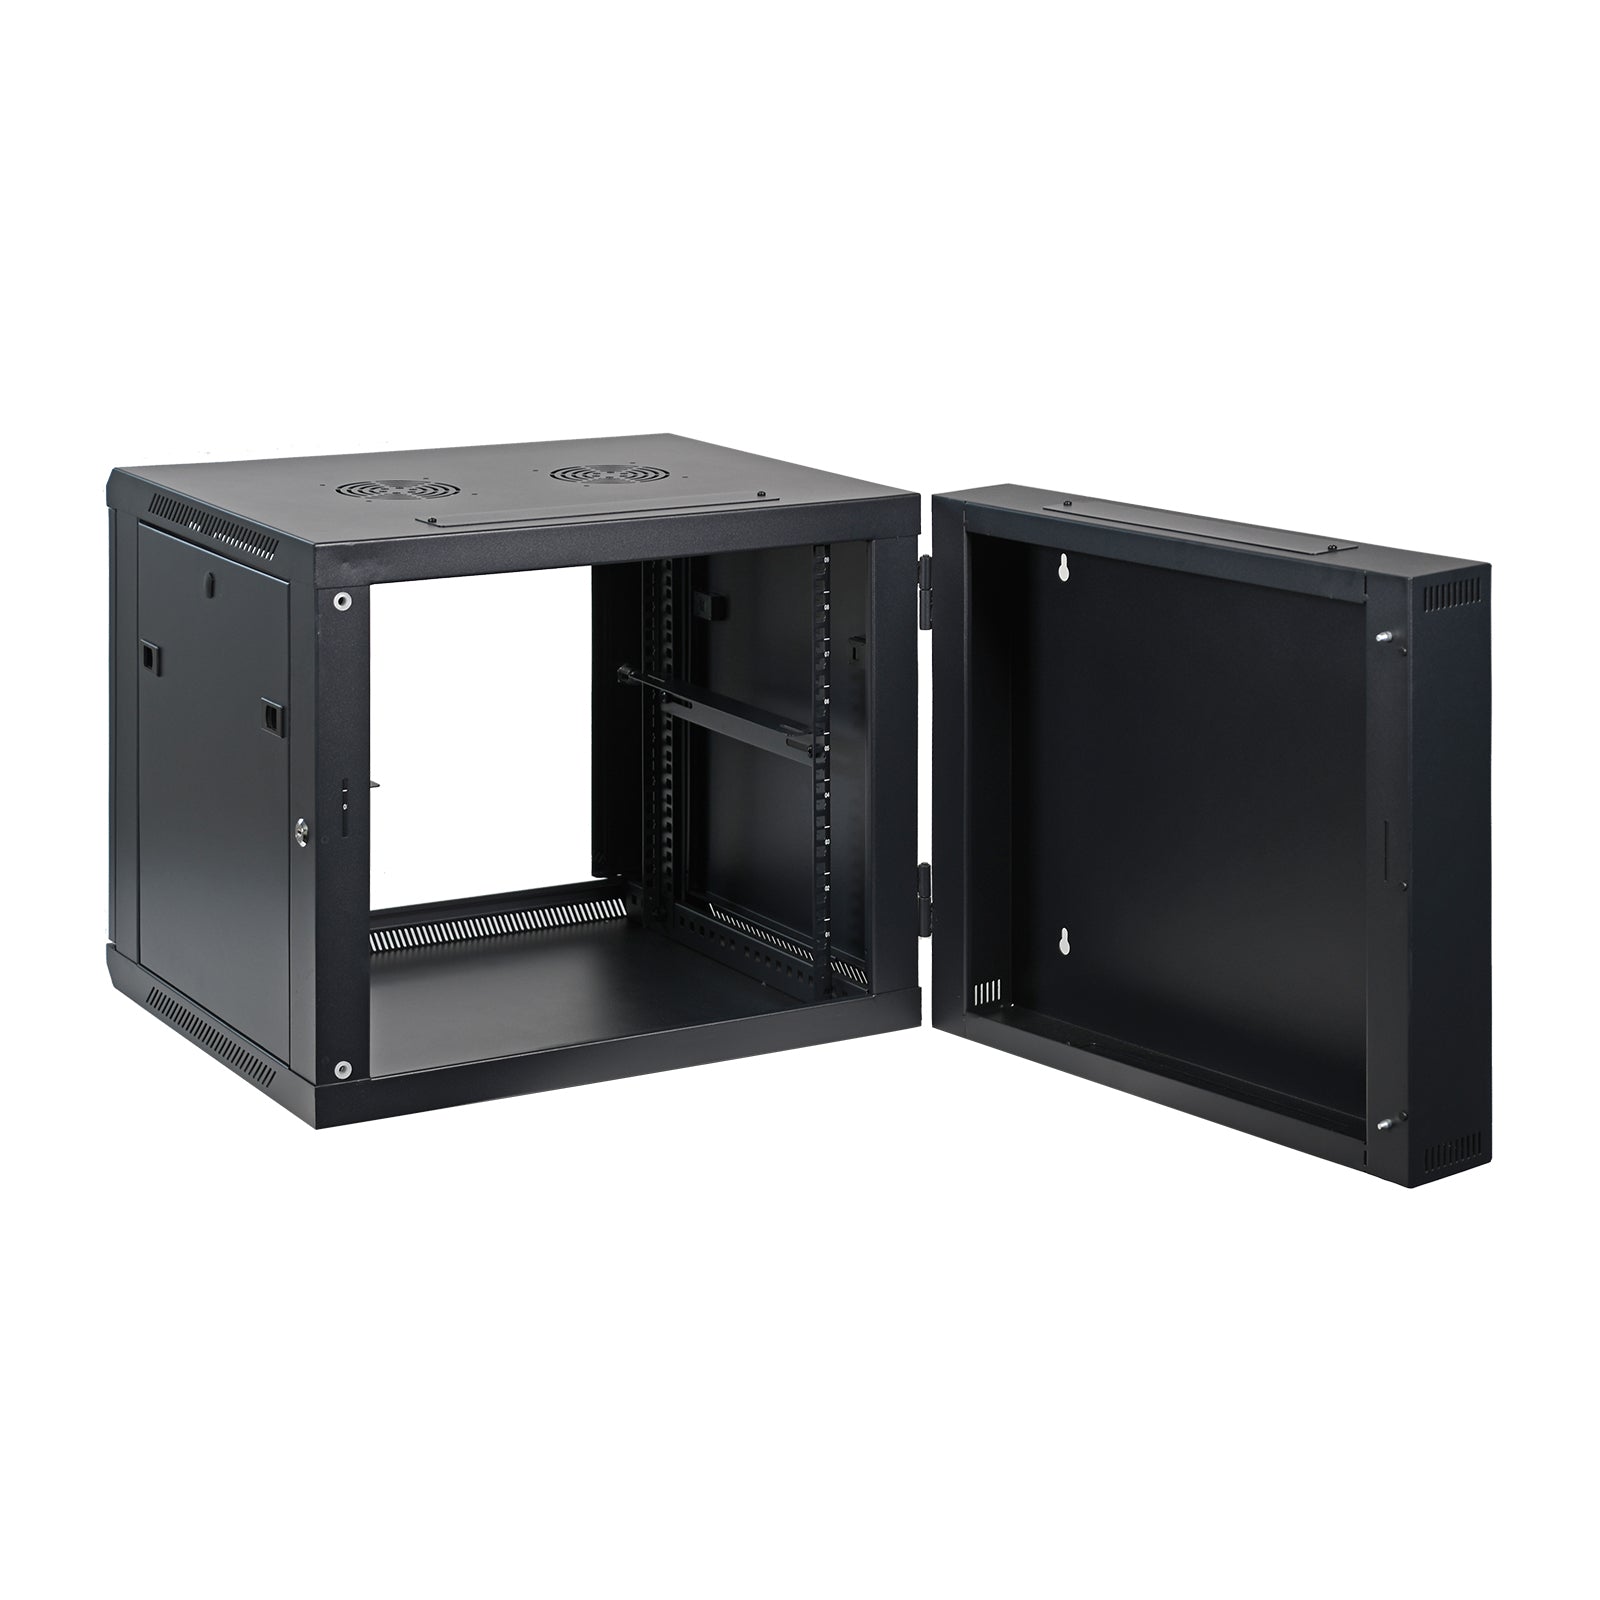 Aeons SB Seires 9U Wall-Mount Network Cabinet, Hinged Swing-Out, Mid-Depth, Glass Door